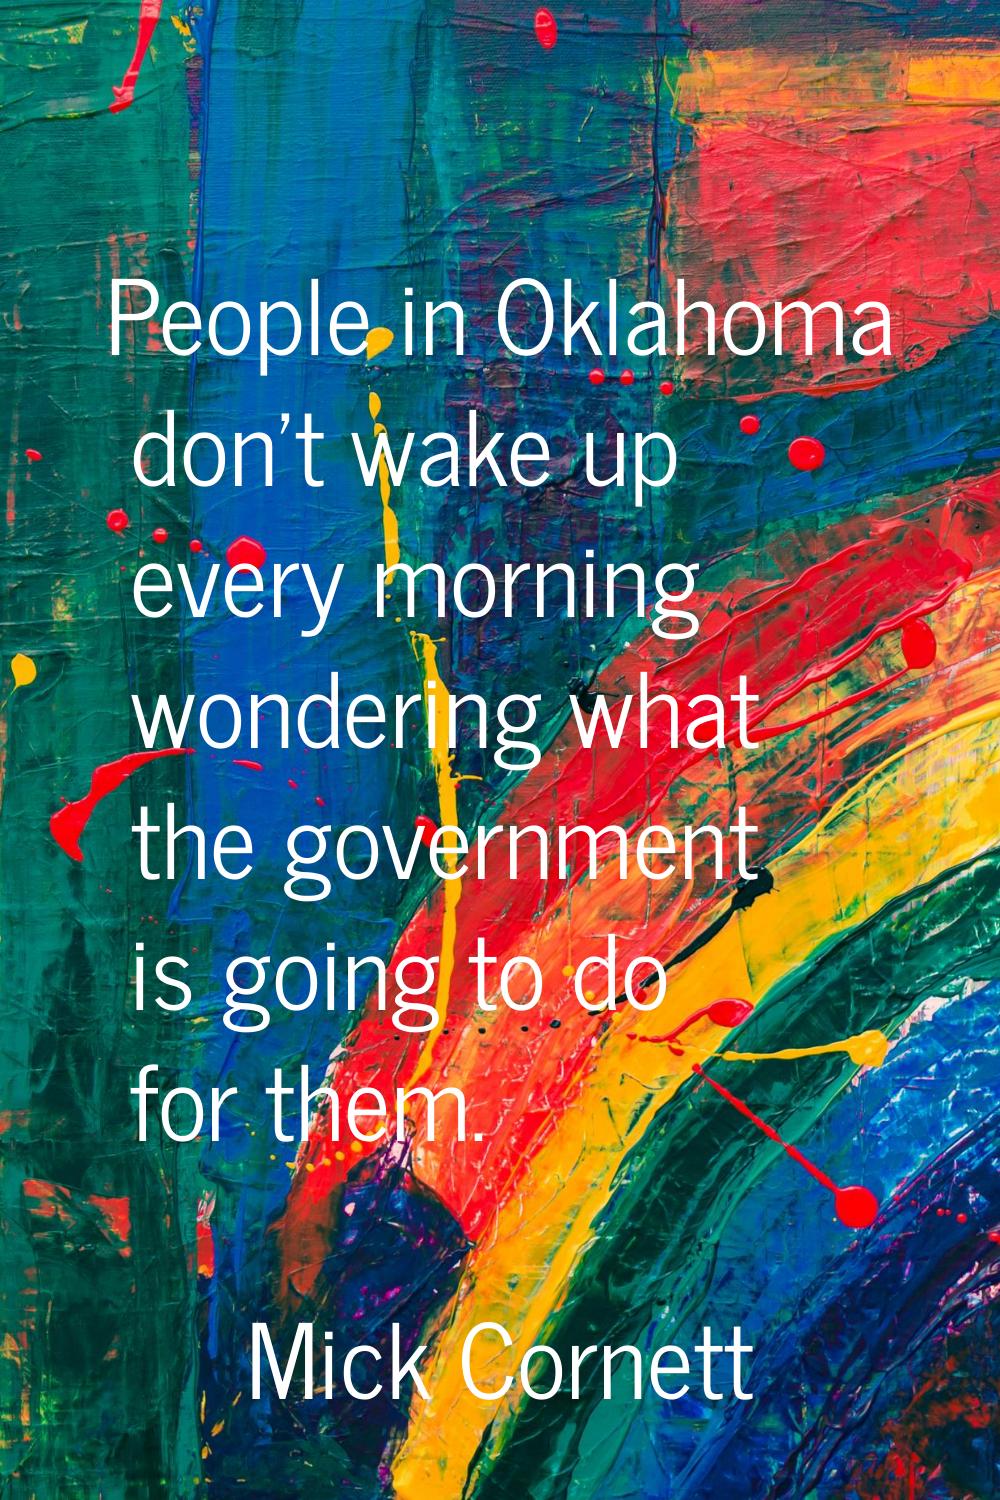 People in Oklahoma don't wake up every morning wondering what the government is going to do for the